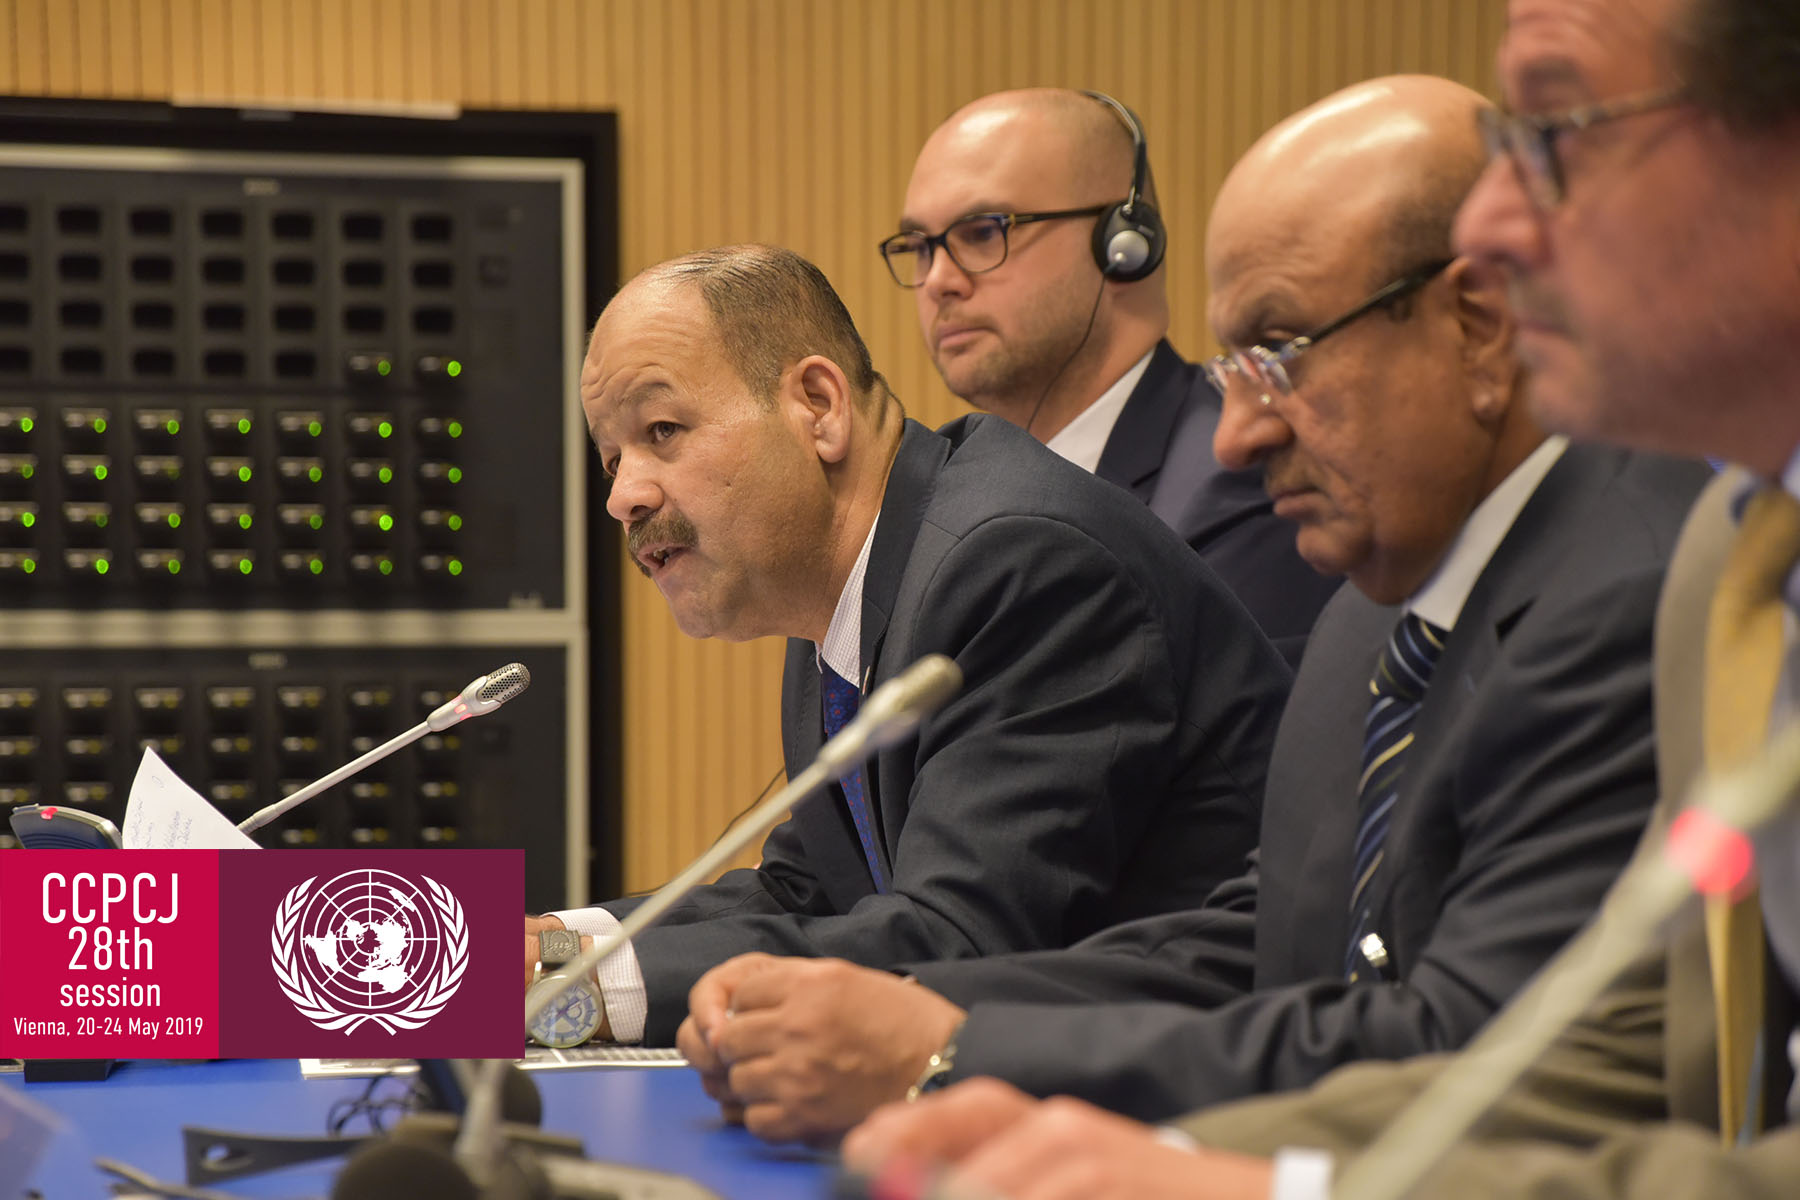 The developments of prisoner rehabilitation programmes in Palestine – a special CCPCJ side event